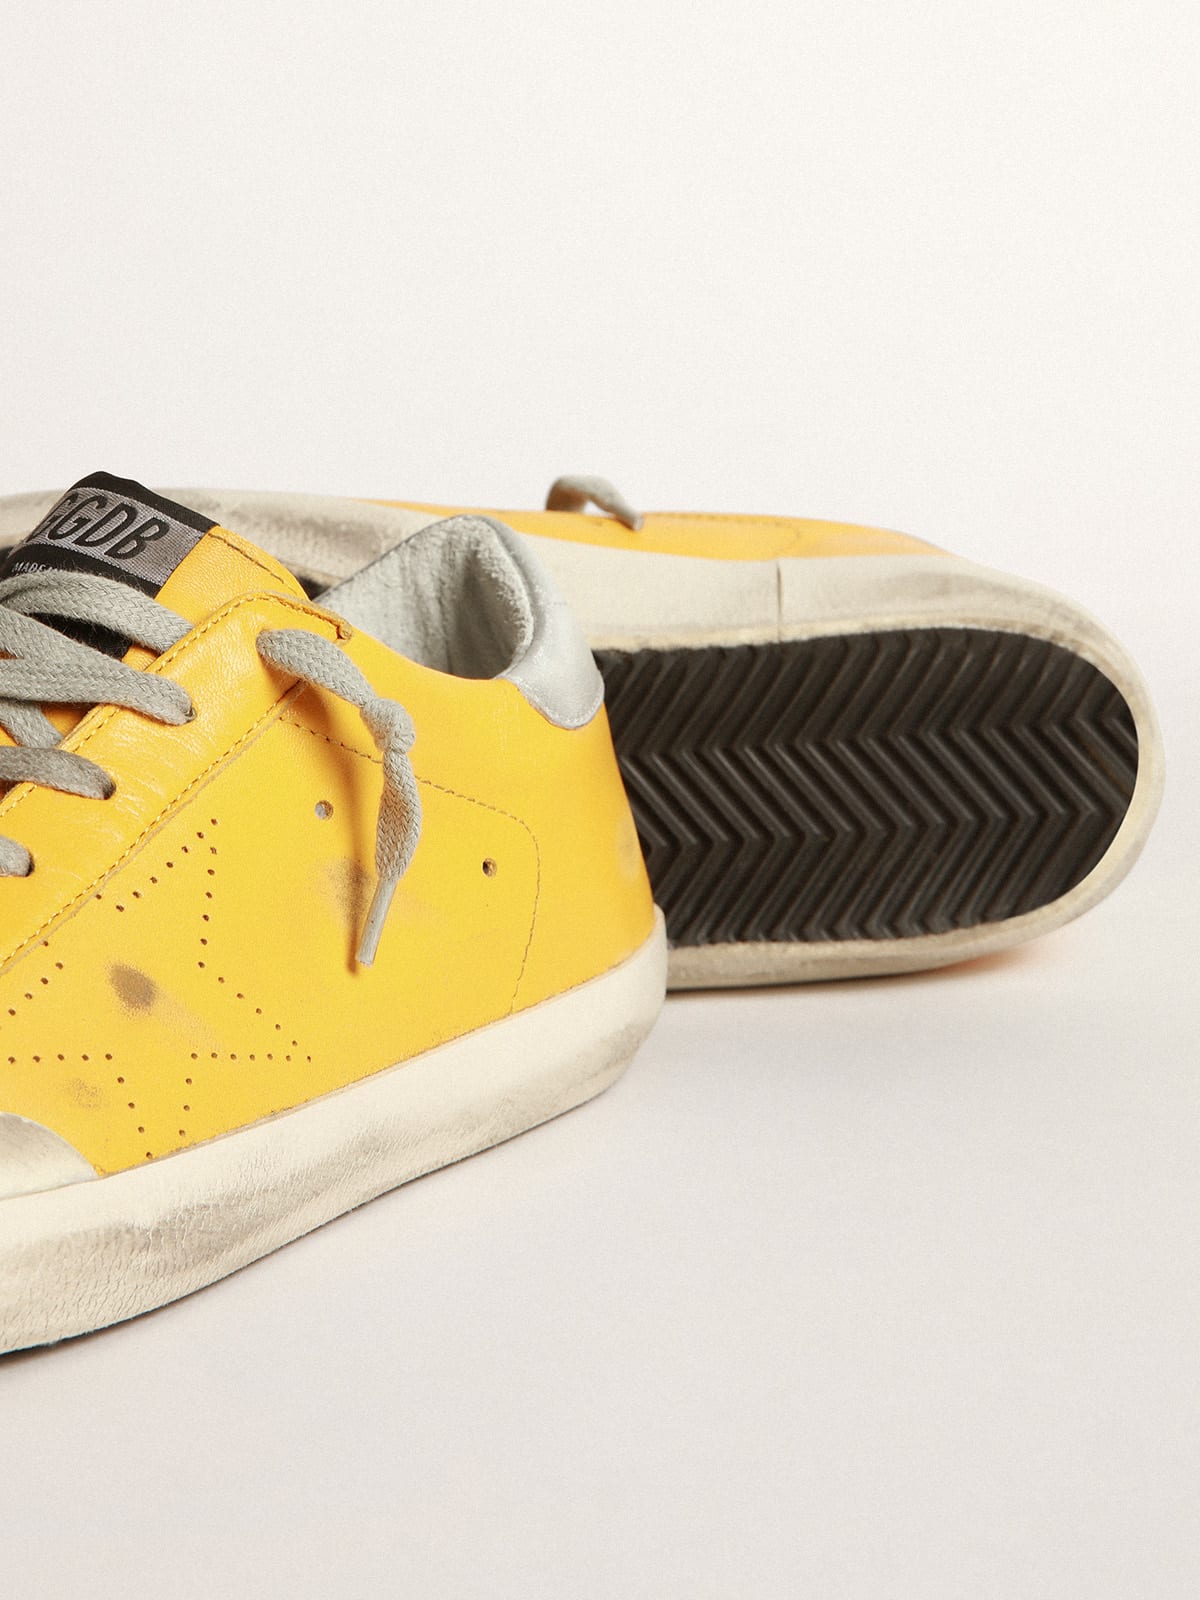 Golden Goose - Superstar sneakers in nappa leather with vintage finishing in 